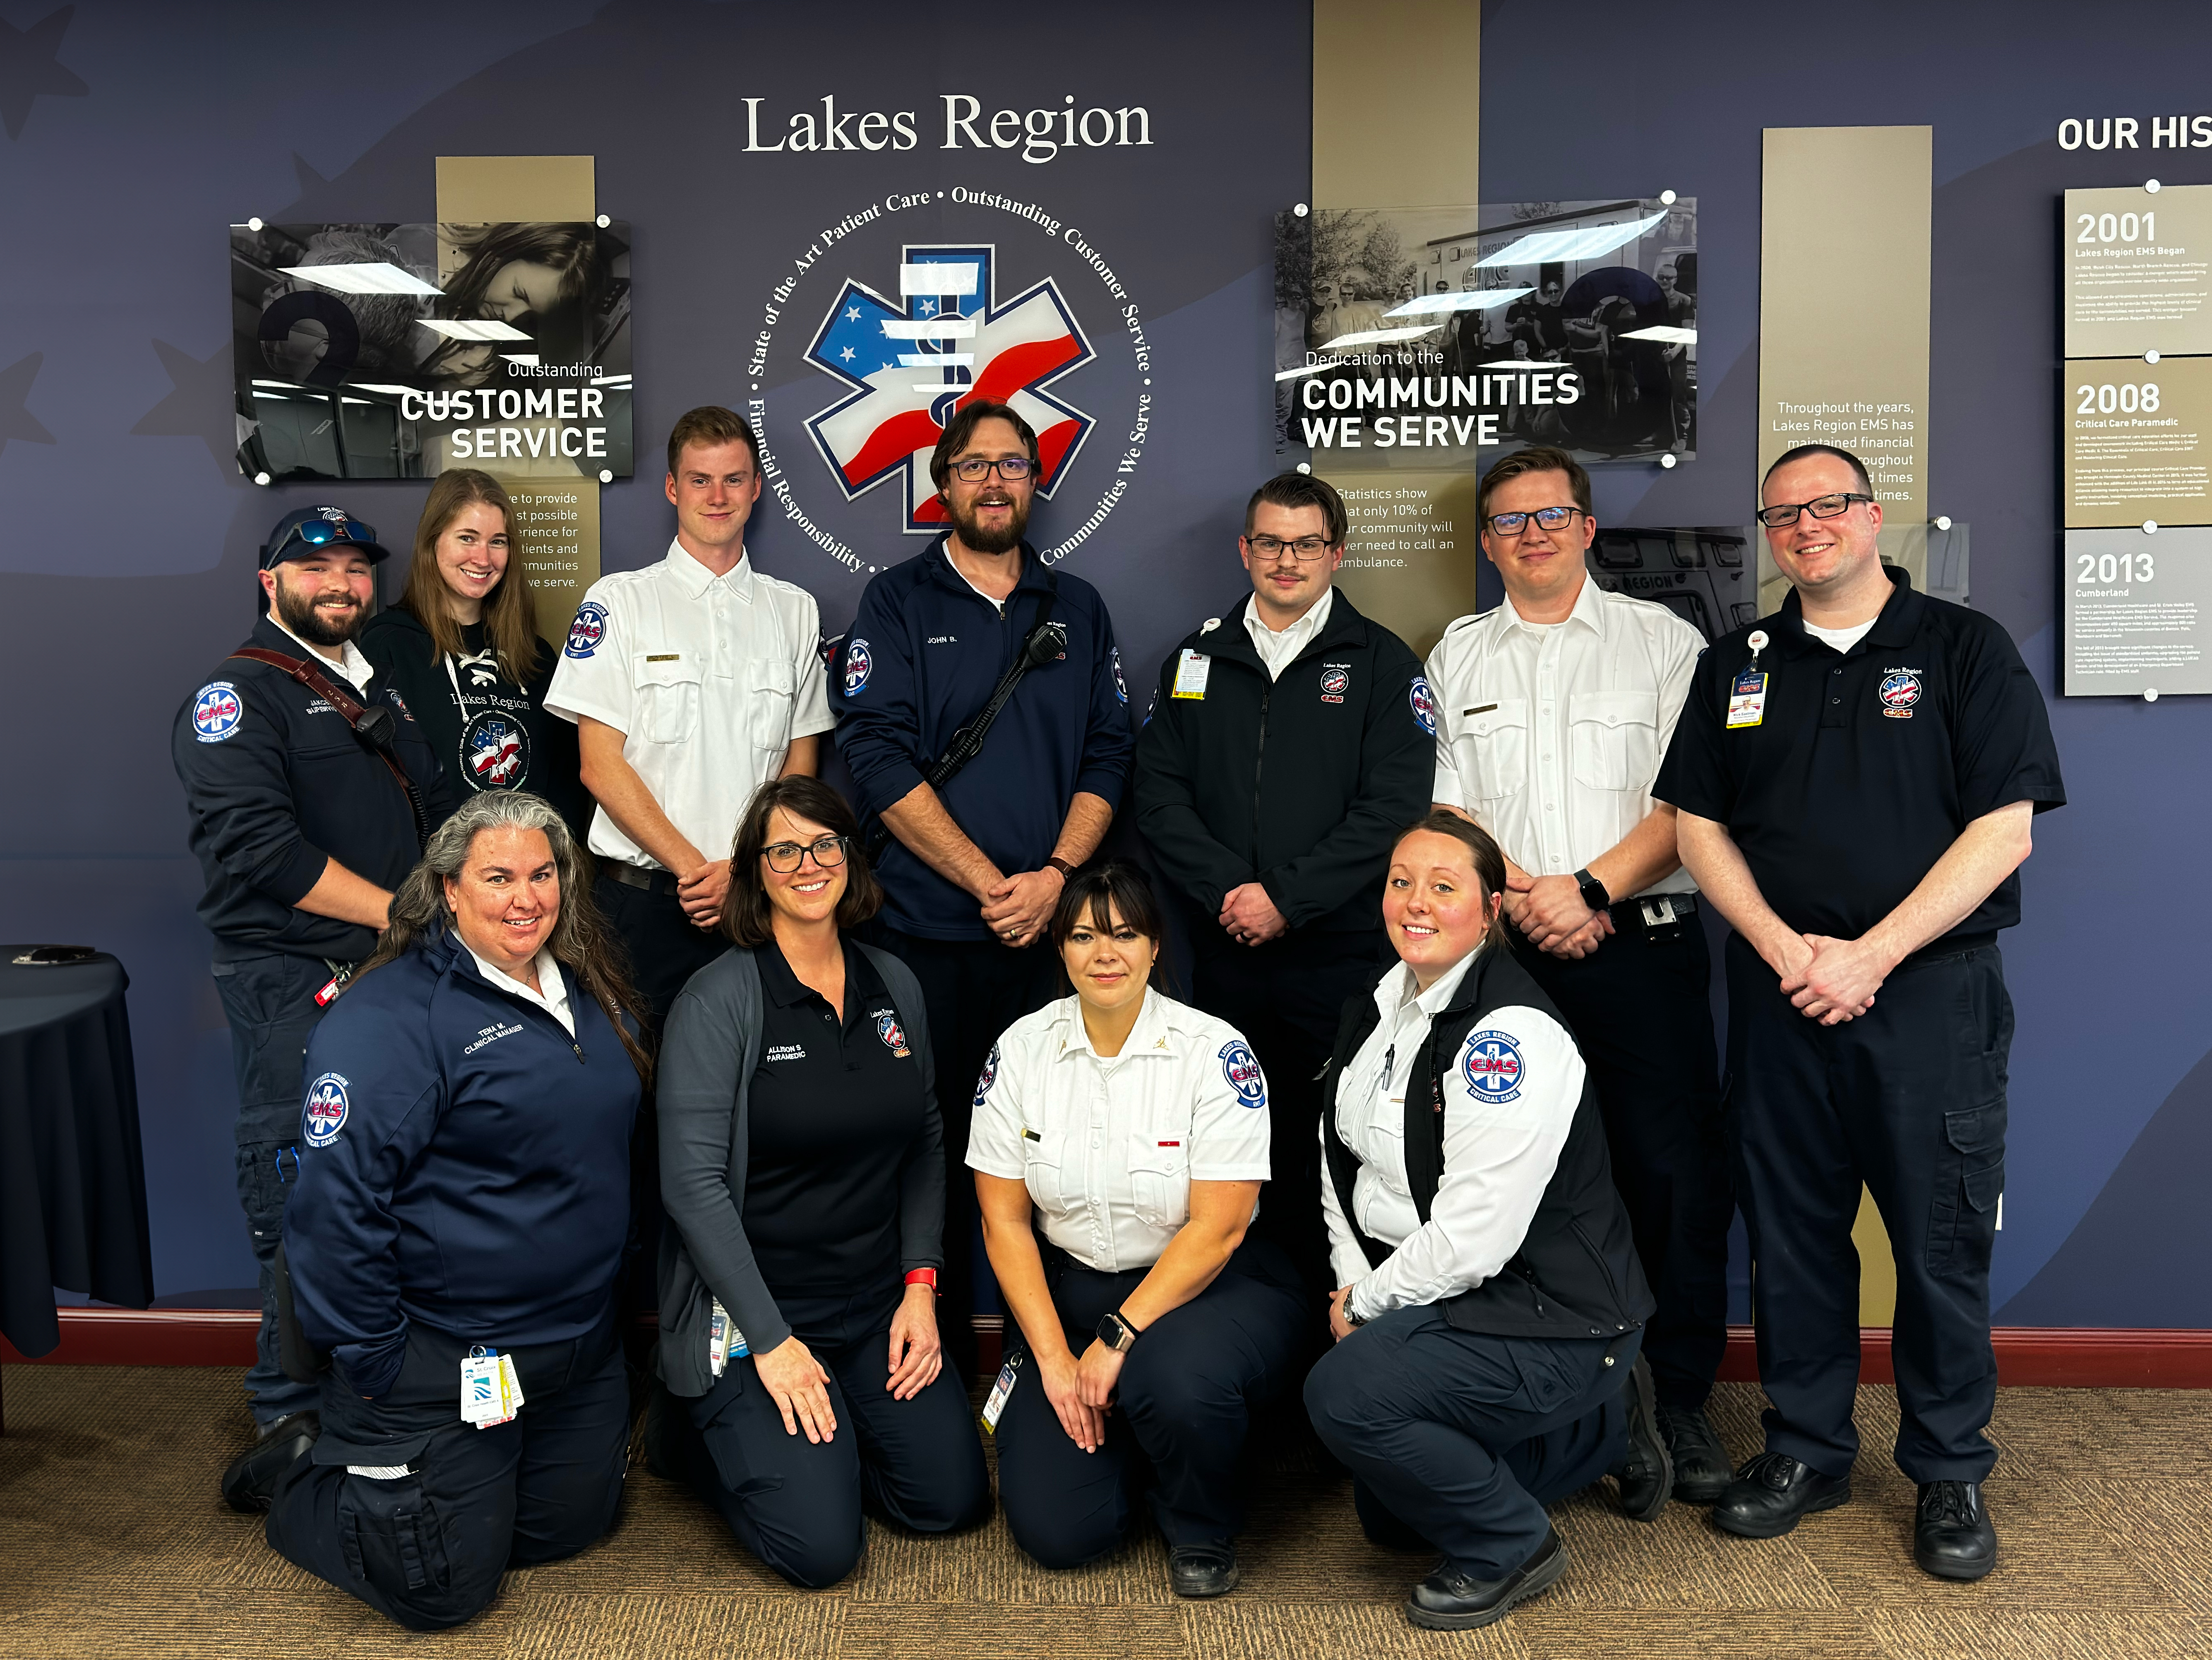 Lakes Region staff smiling for camera